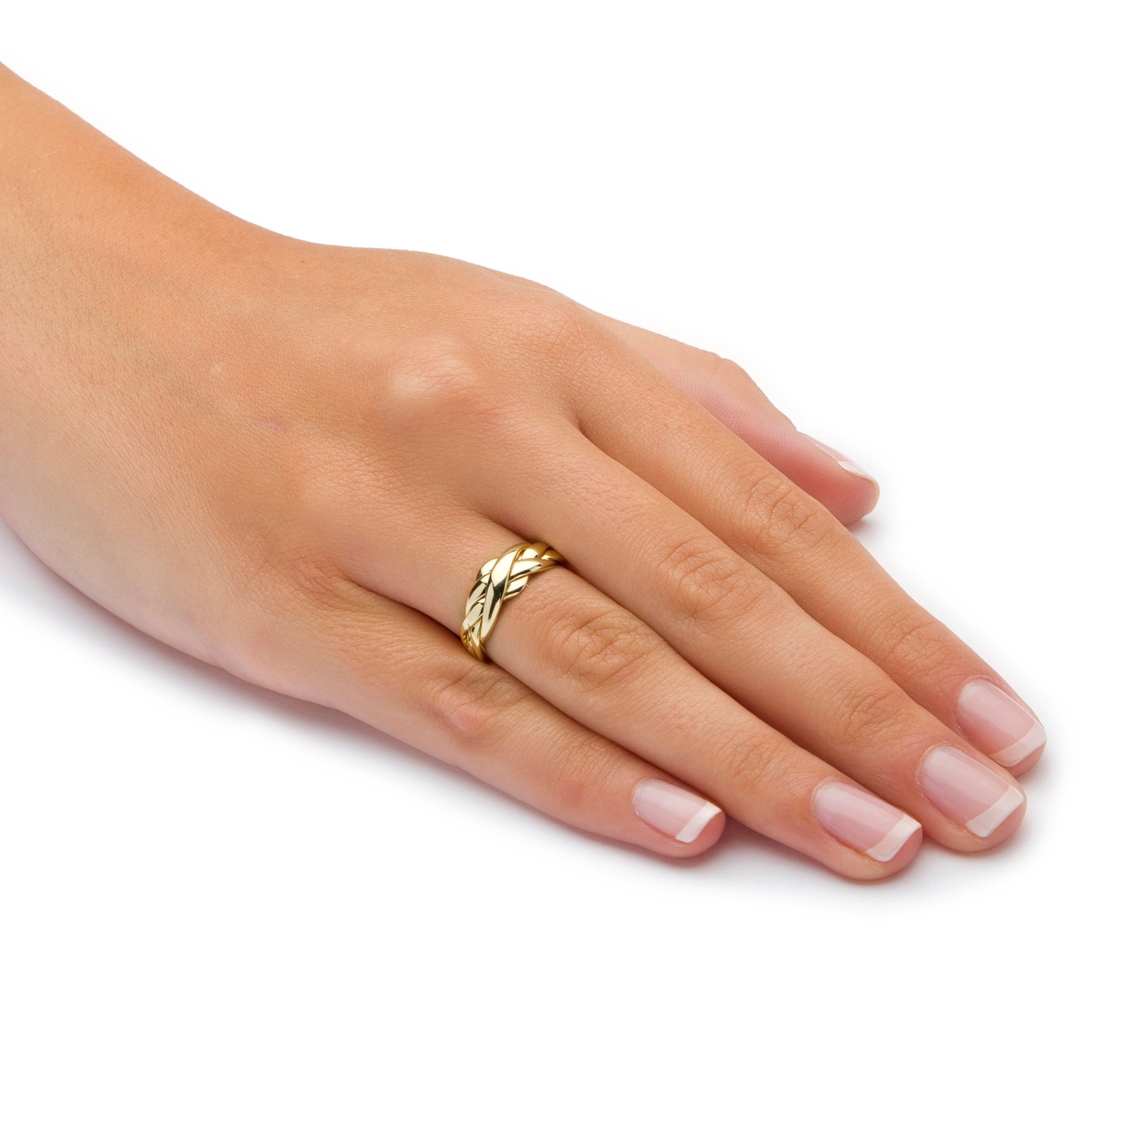 Commitment Symbol Braided Puzzle Ring in Solid 10k Yellow Gold - Image 3 of 5